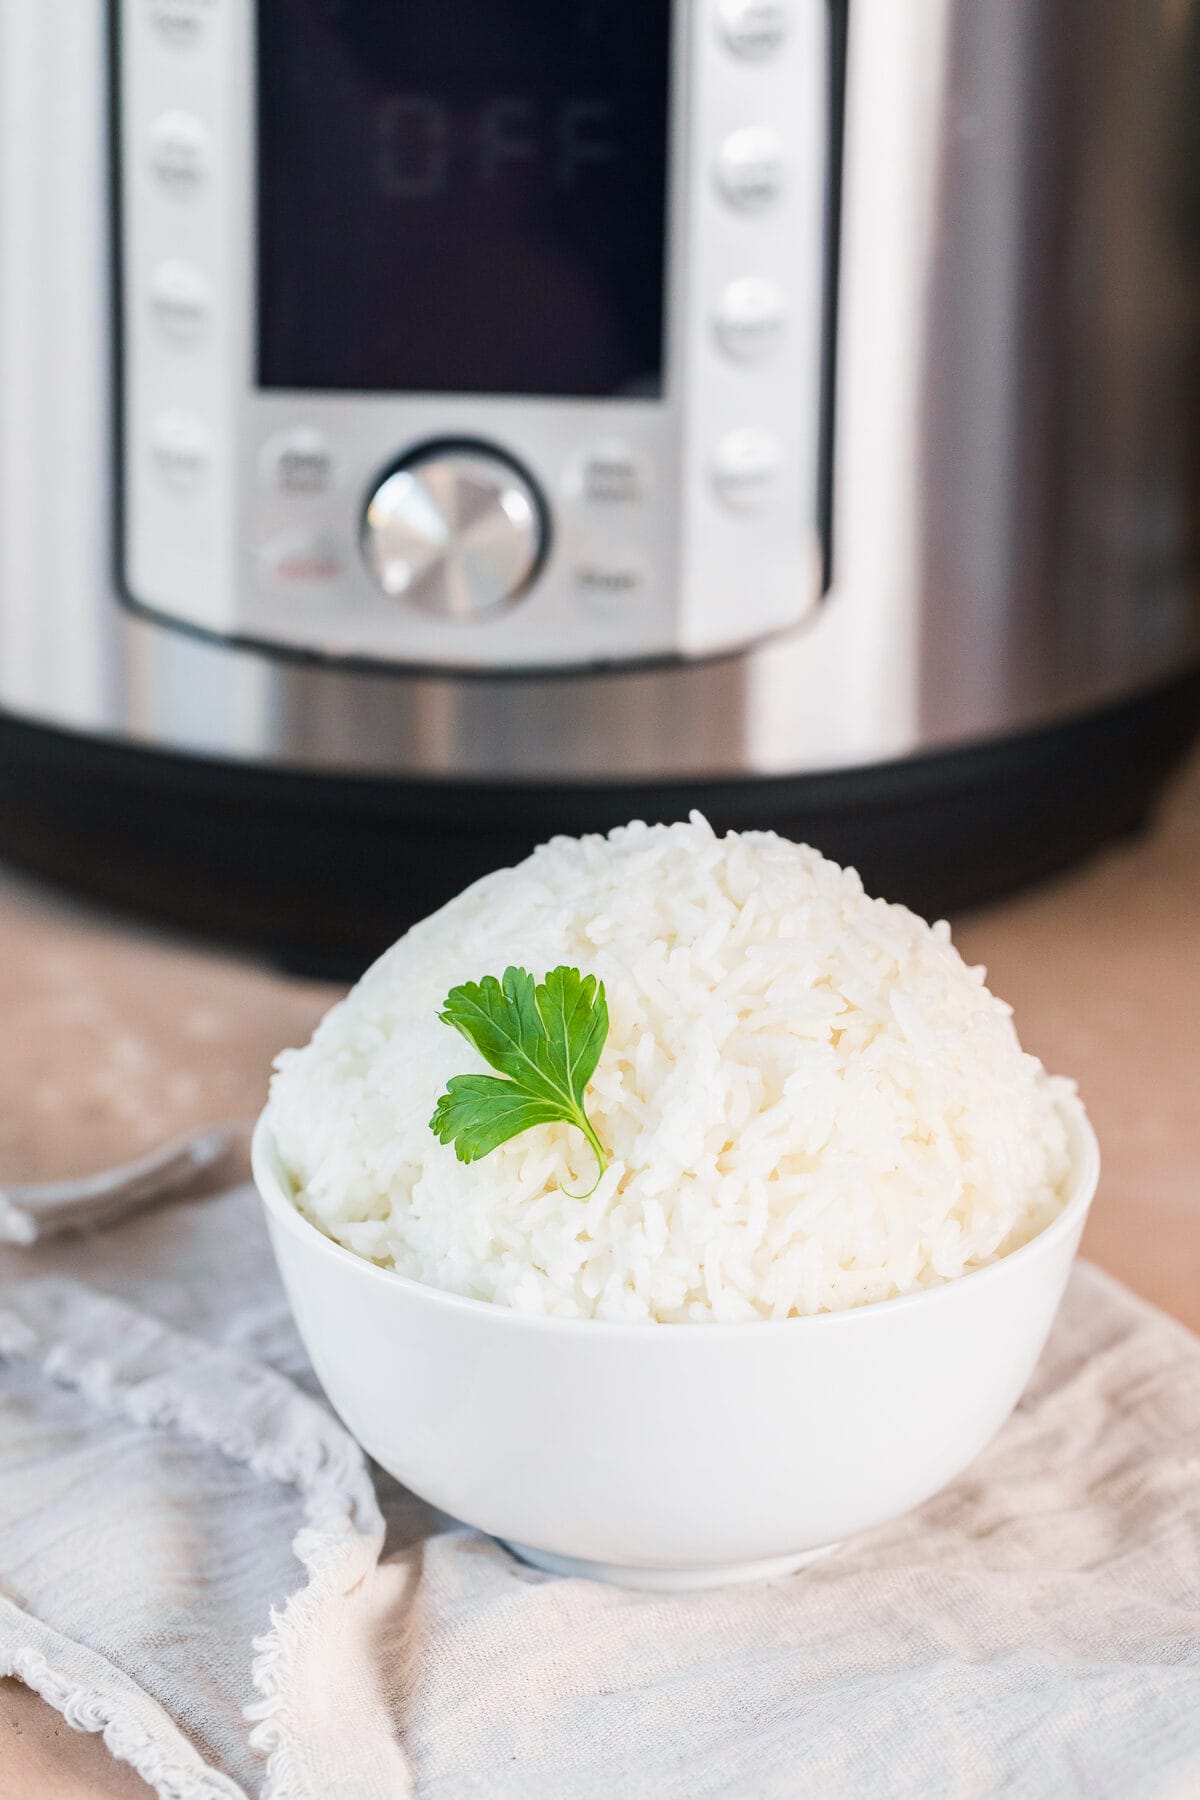 fresh cooked instant pot jasmine rice in a white bowl with a piece of parsley as garnish on a beige napkin in front of an instant pot.